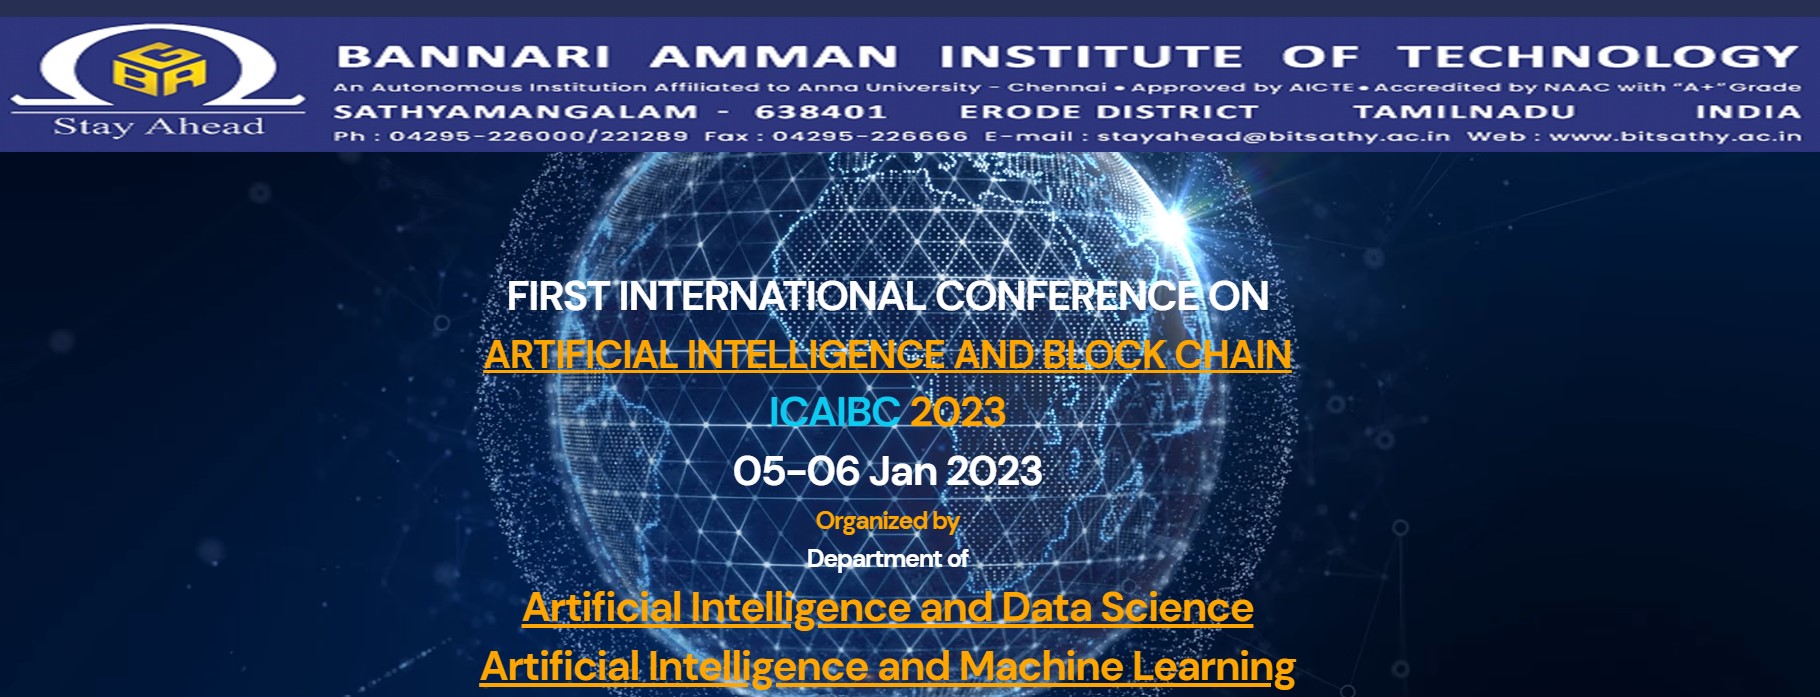 First International Conference On Artificial Intelligence and Block Chain ICAIBC - 2023